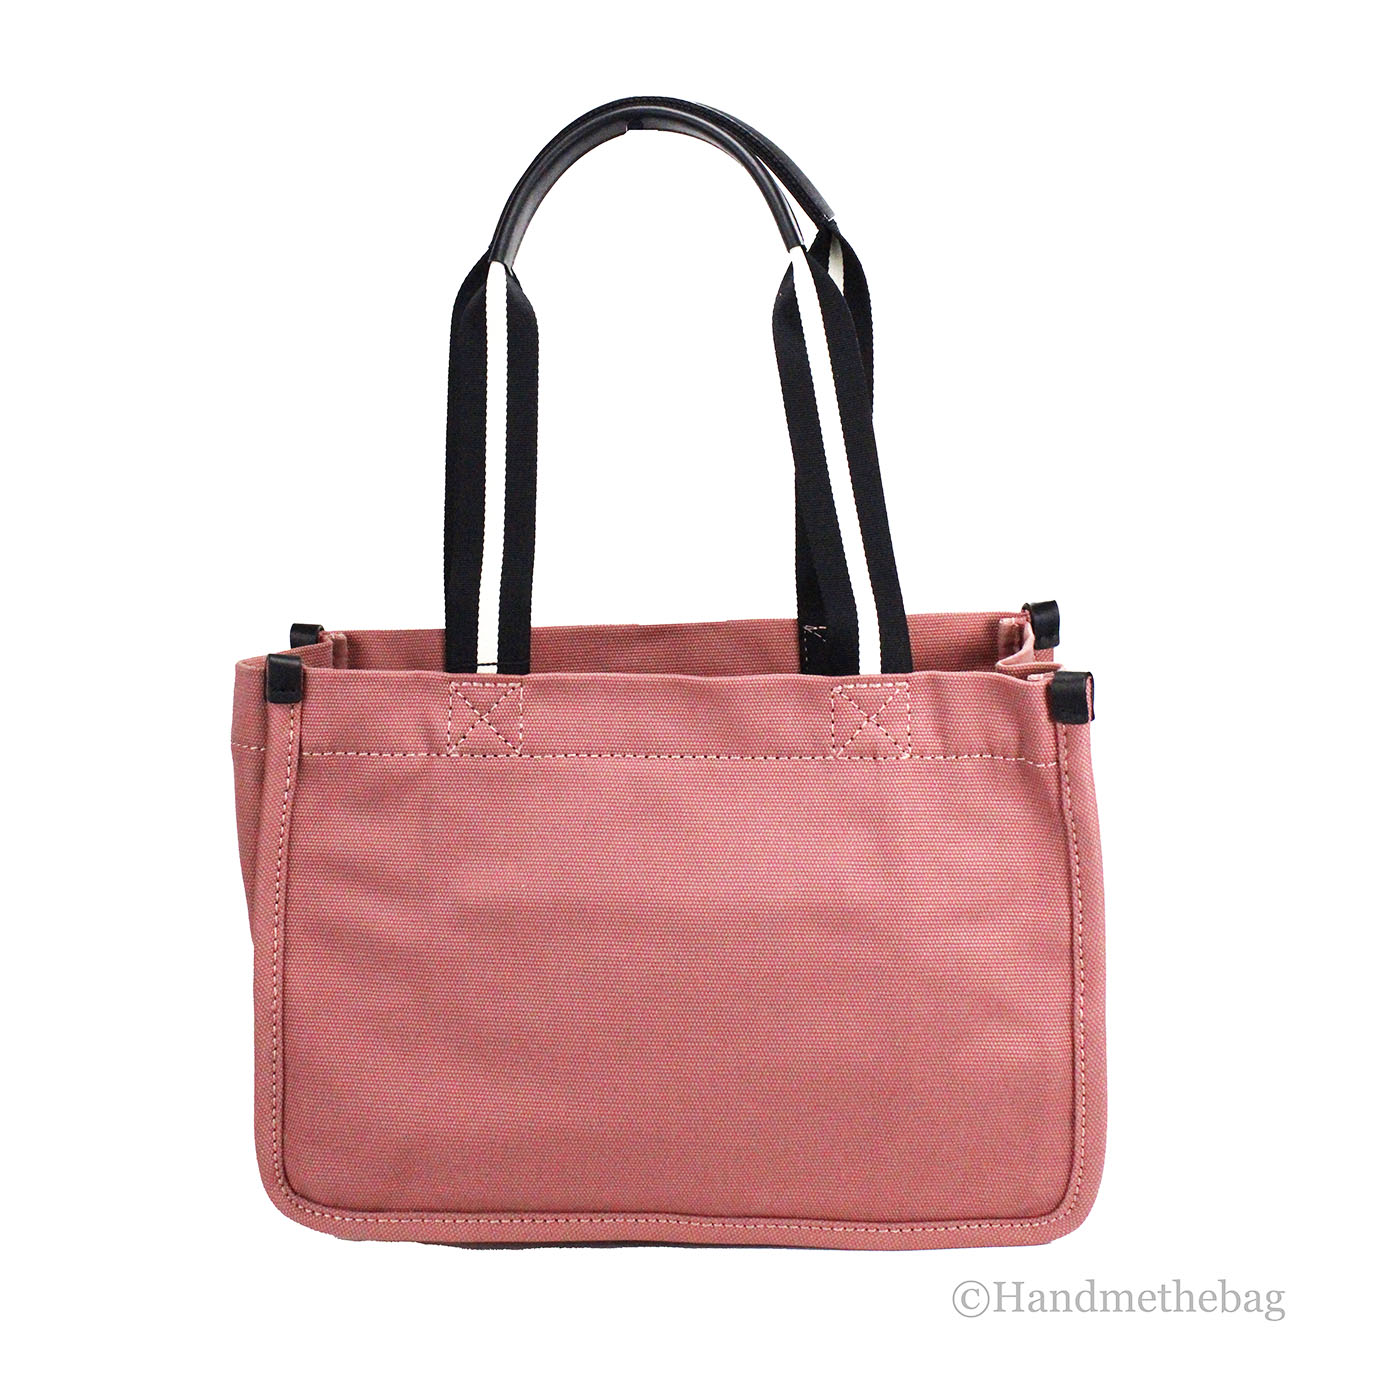 Marc Jacobs Signet Medium Dusty Rose Canvas Convertible Tote